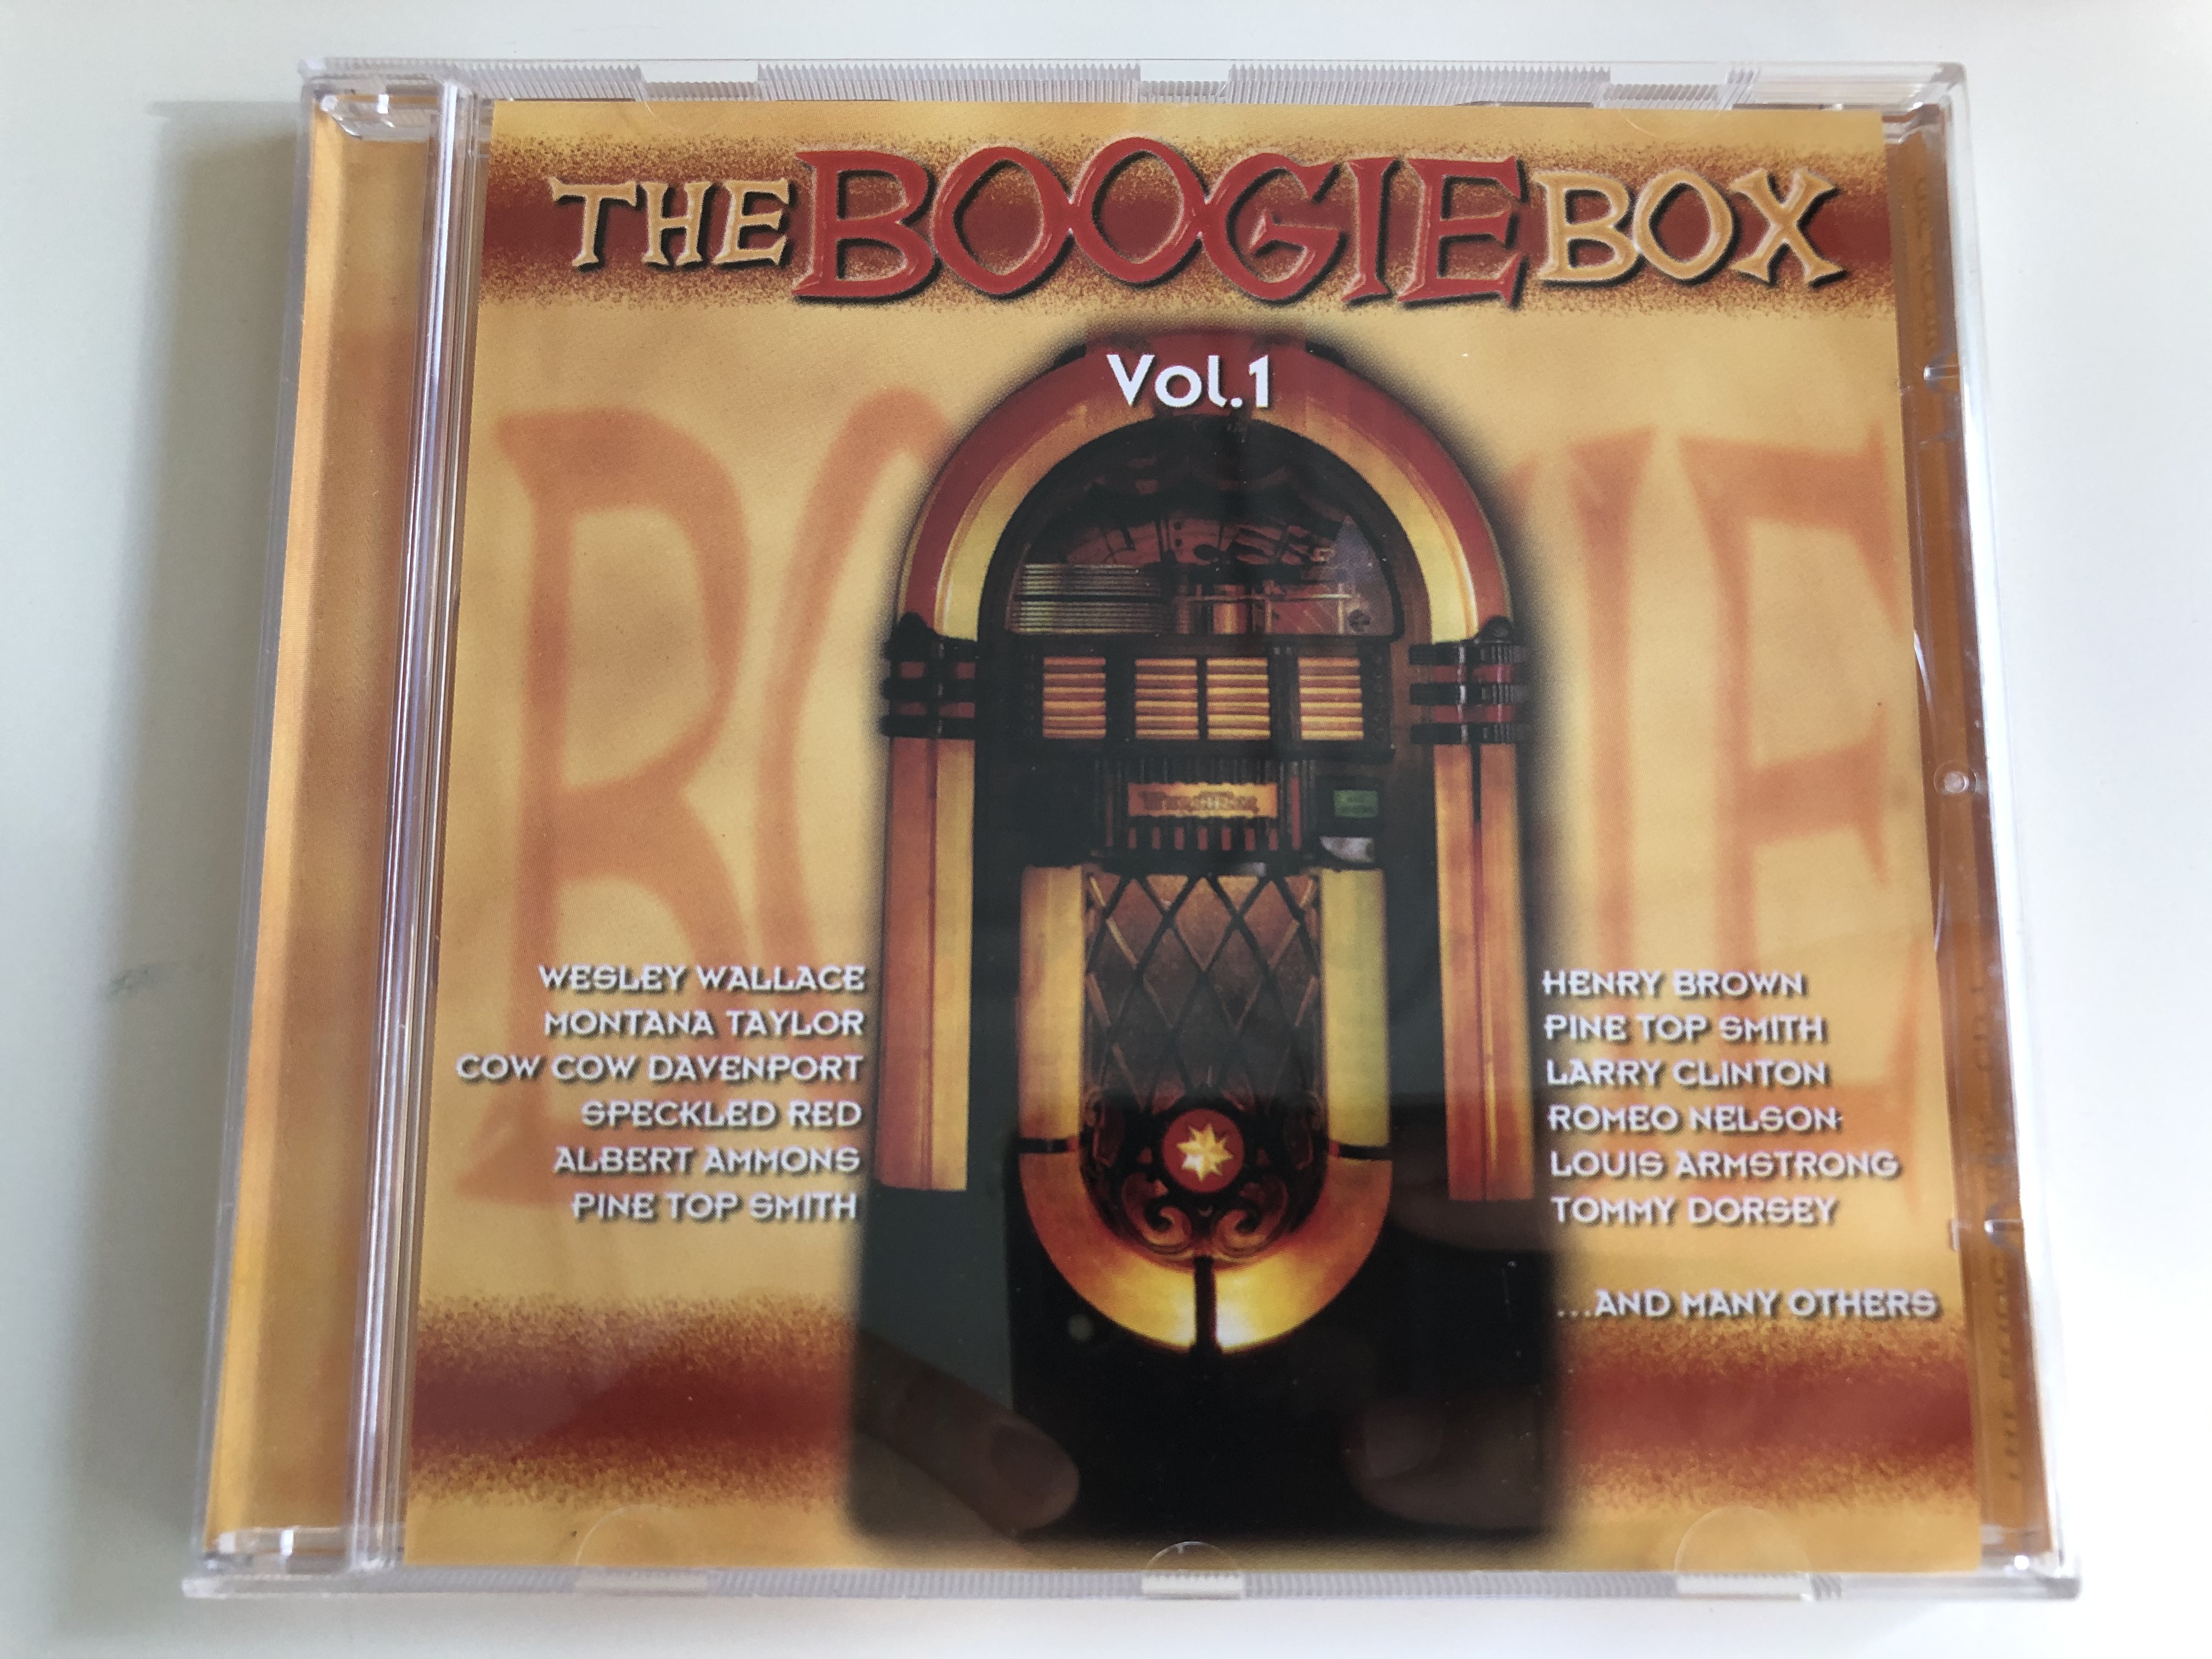 the-boogie-box-vol.-1-weesley-wallace-montana-taylor-cow-cow-davenport-spreckled-red-albert-ammons-pine-top-smith-henry-brown-pine-top-smith-larry-clinton-romeo-nelson-louis-armstrong-...-tim-cz-aud-1-.jpg